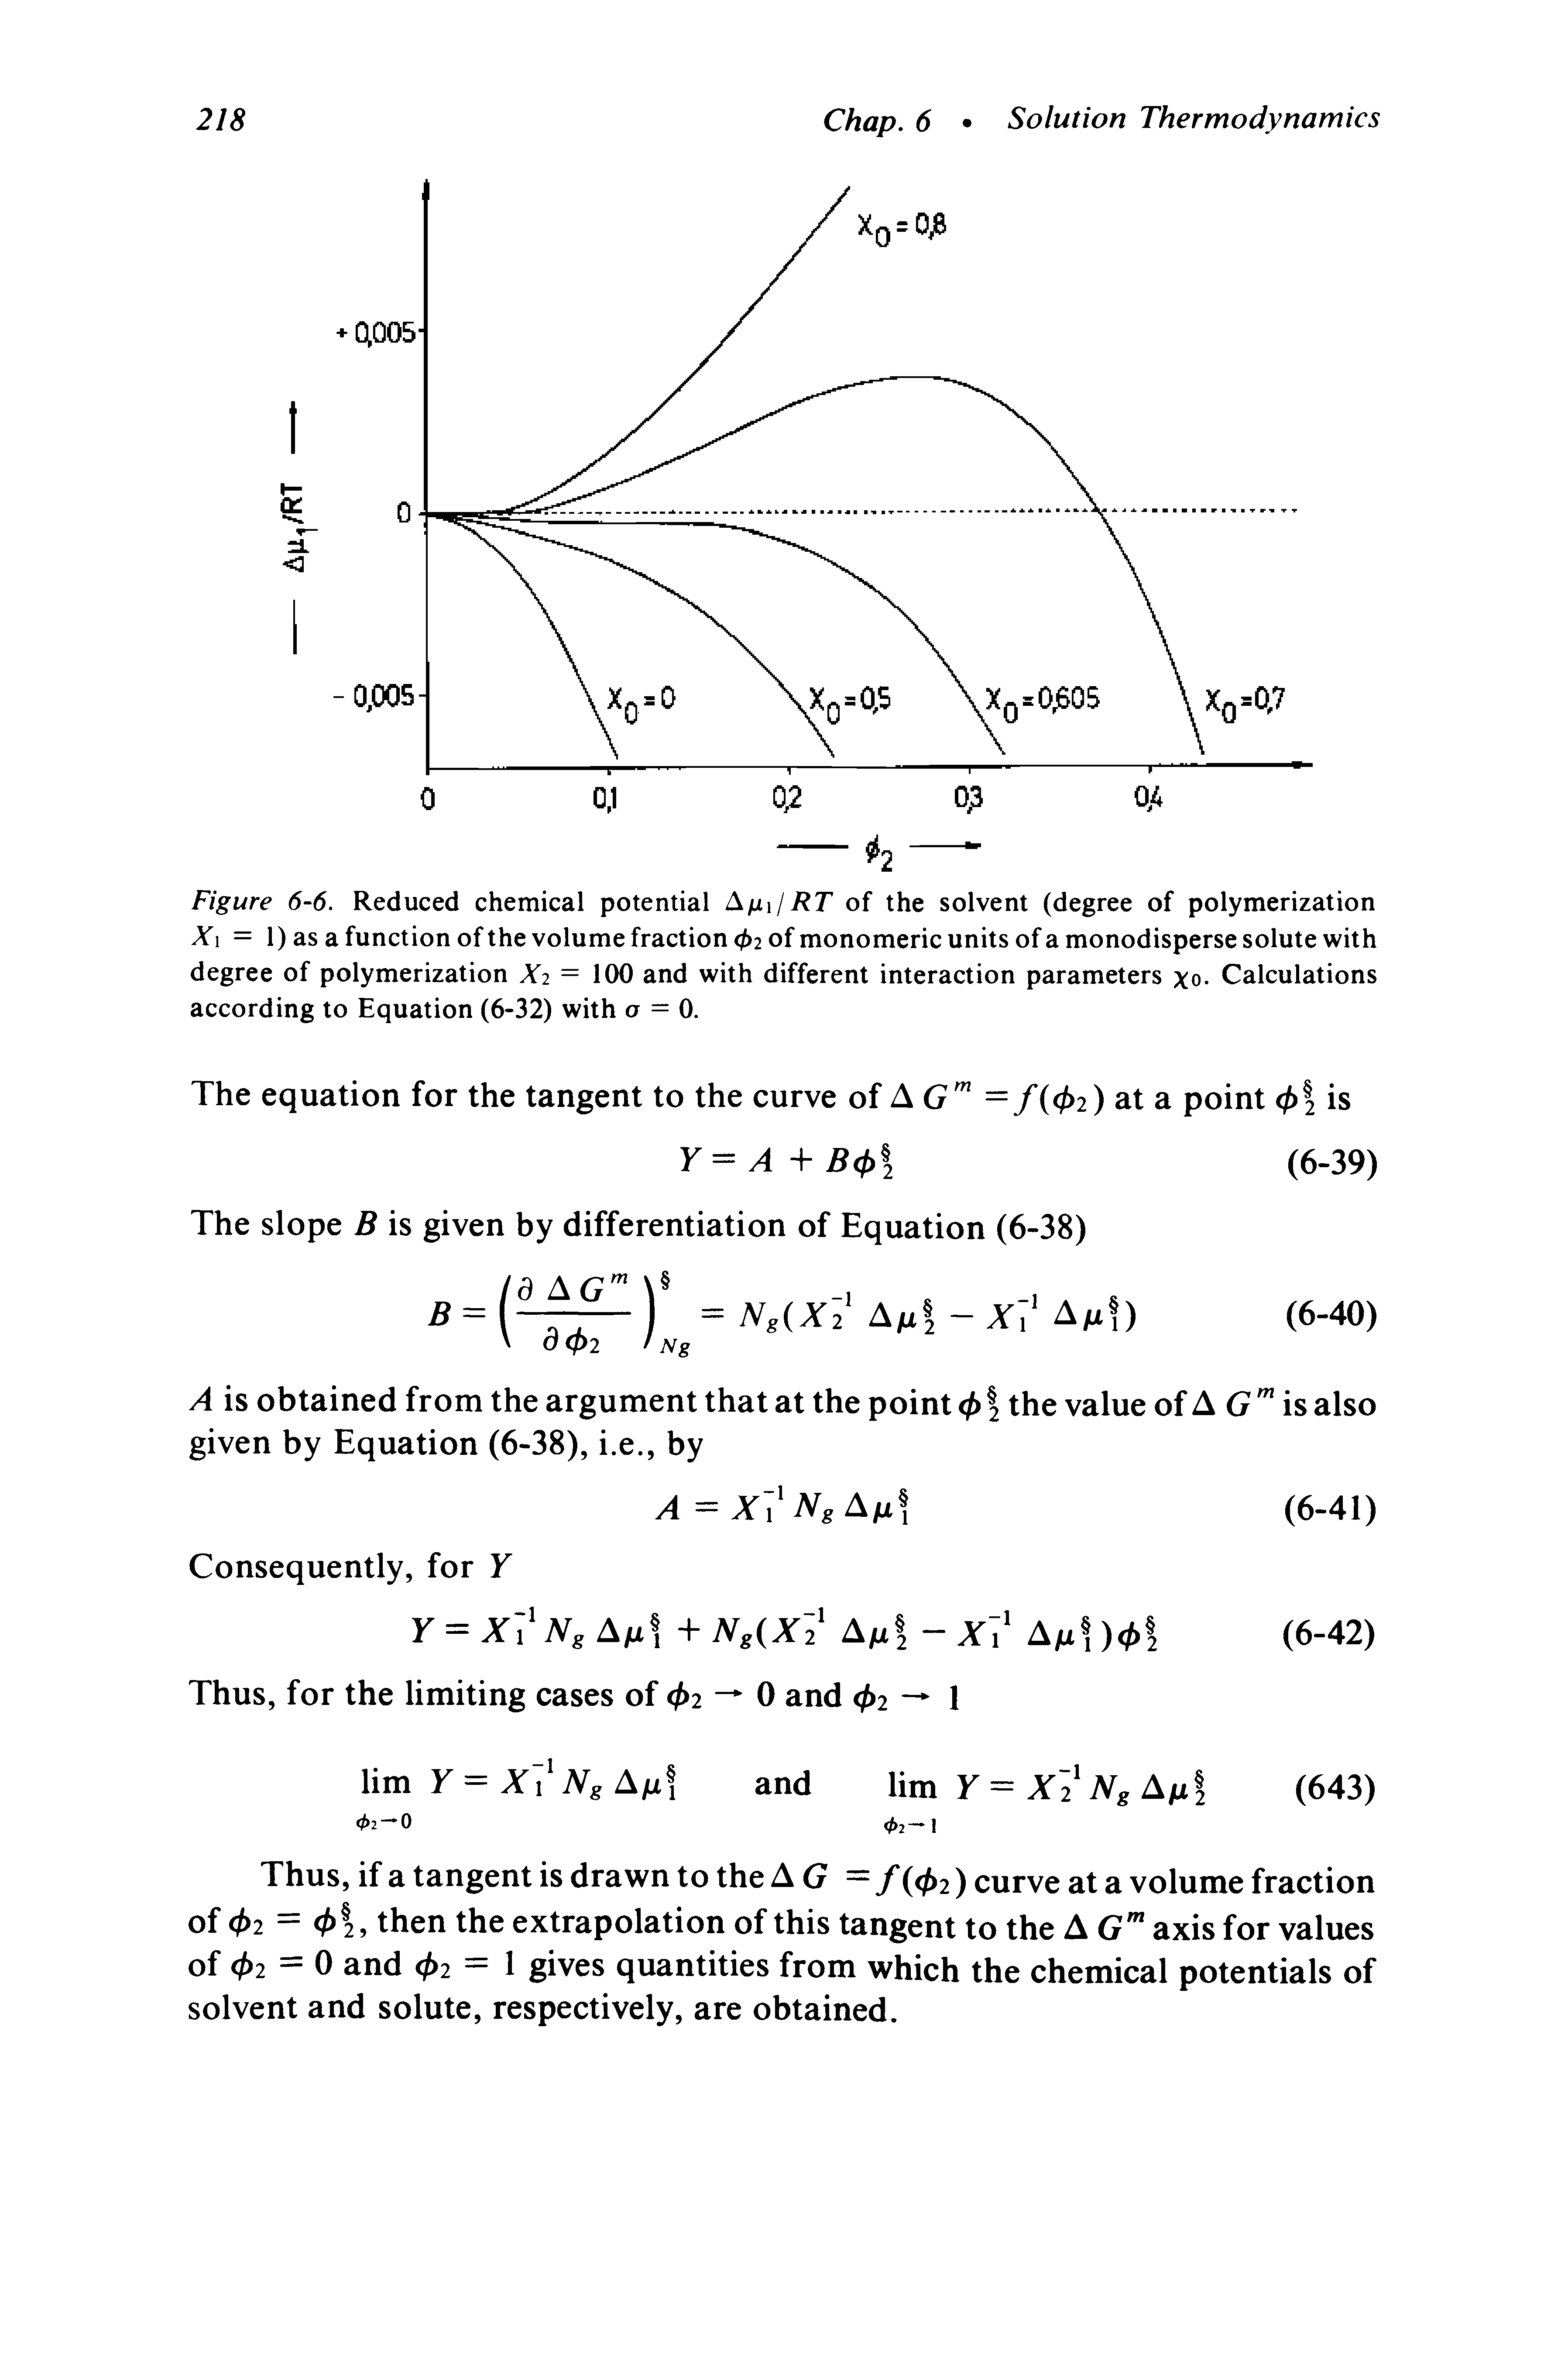 Figure 6-6. Reduced chemical potential Am/RT of the solvent (degree of polymerization Xi = 1) as a function of the volume fraction 02 of monomeric units of a monodisperse solute with degree of polymerization X2 = 100 and with different interaction parameters xo. Calculations according to Equation (6-32) with o = 0.